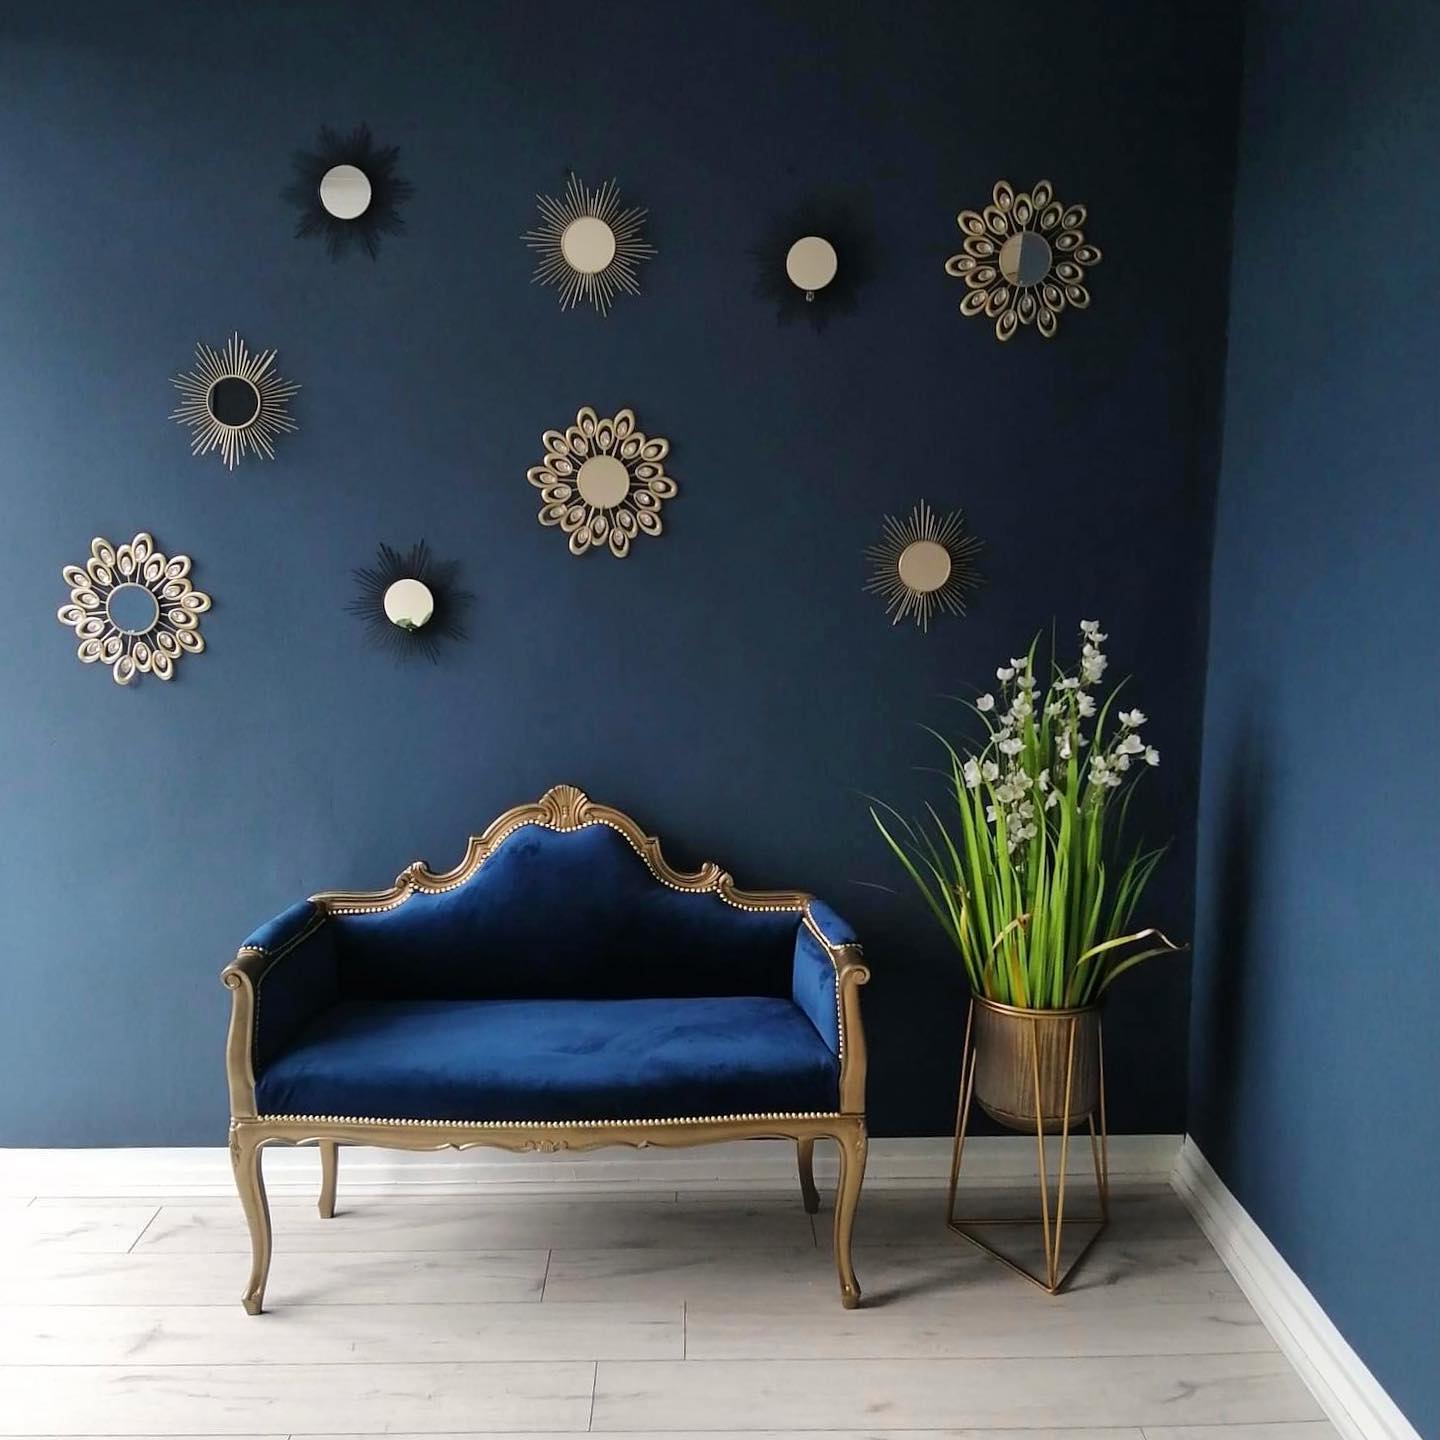 Frenchic Paint | Smooth Operator Wall Paint by Weirs of Baggot St